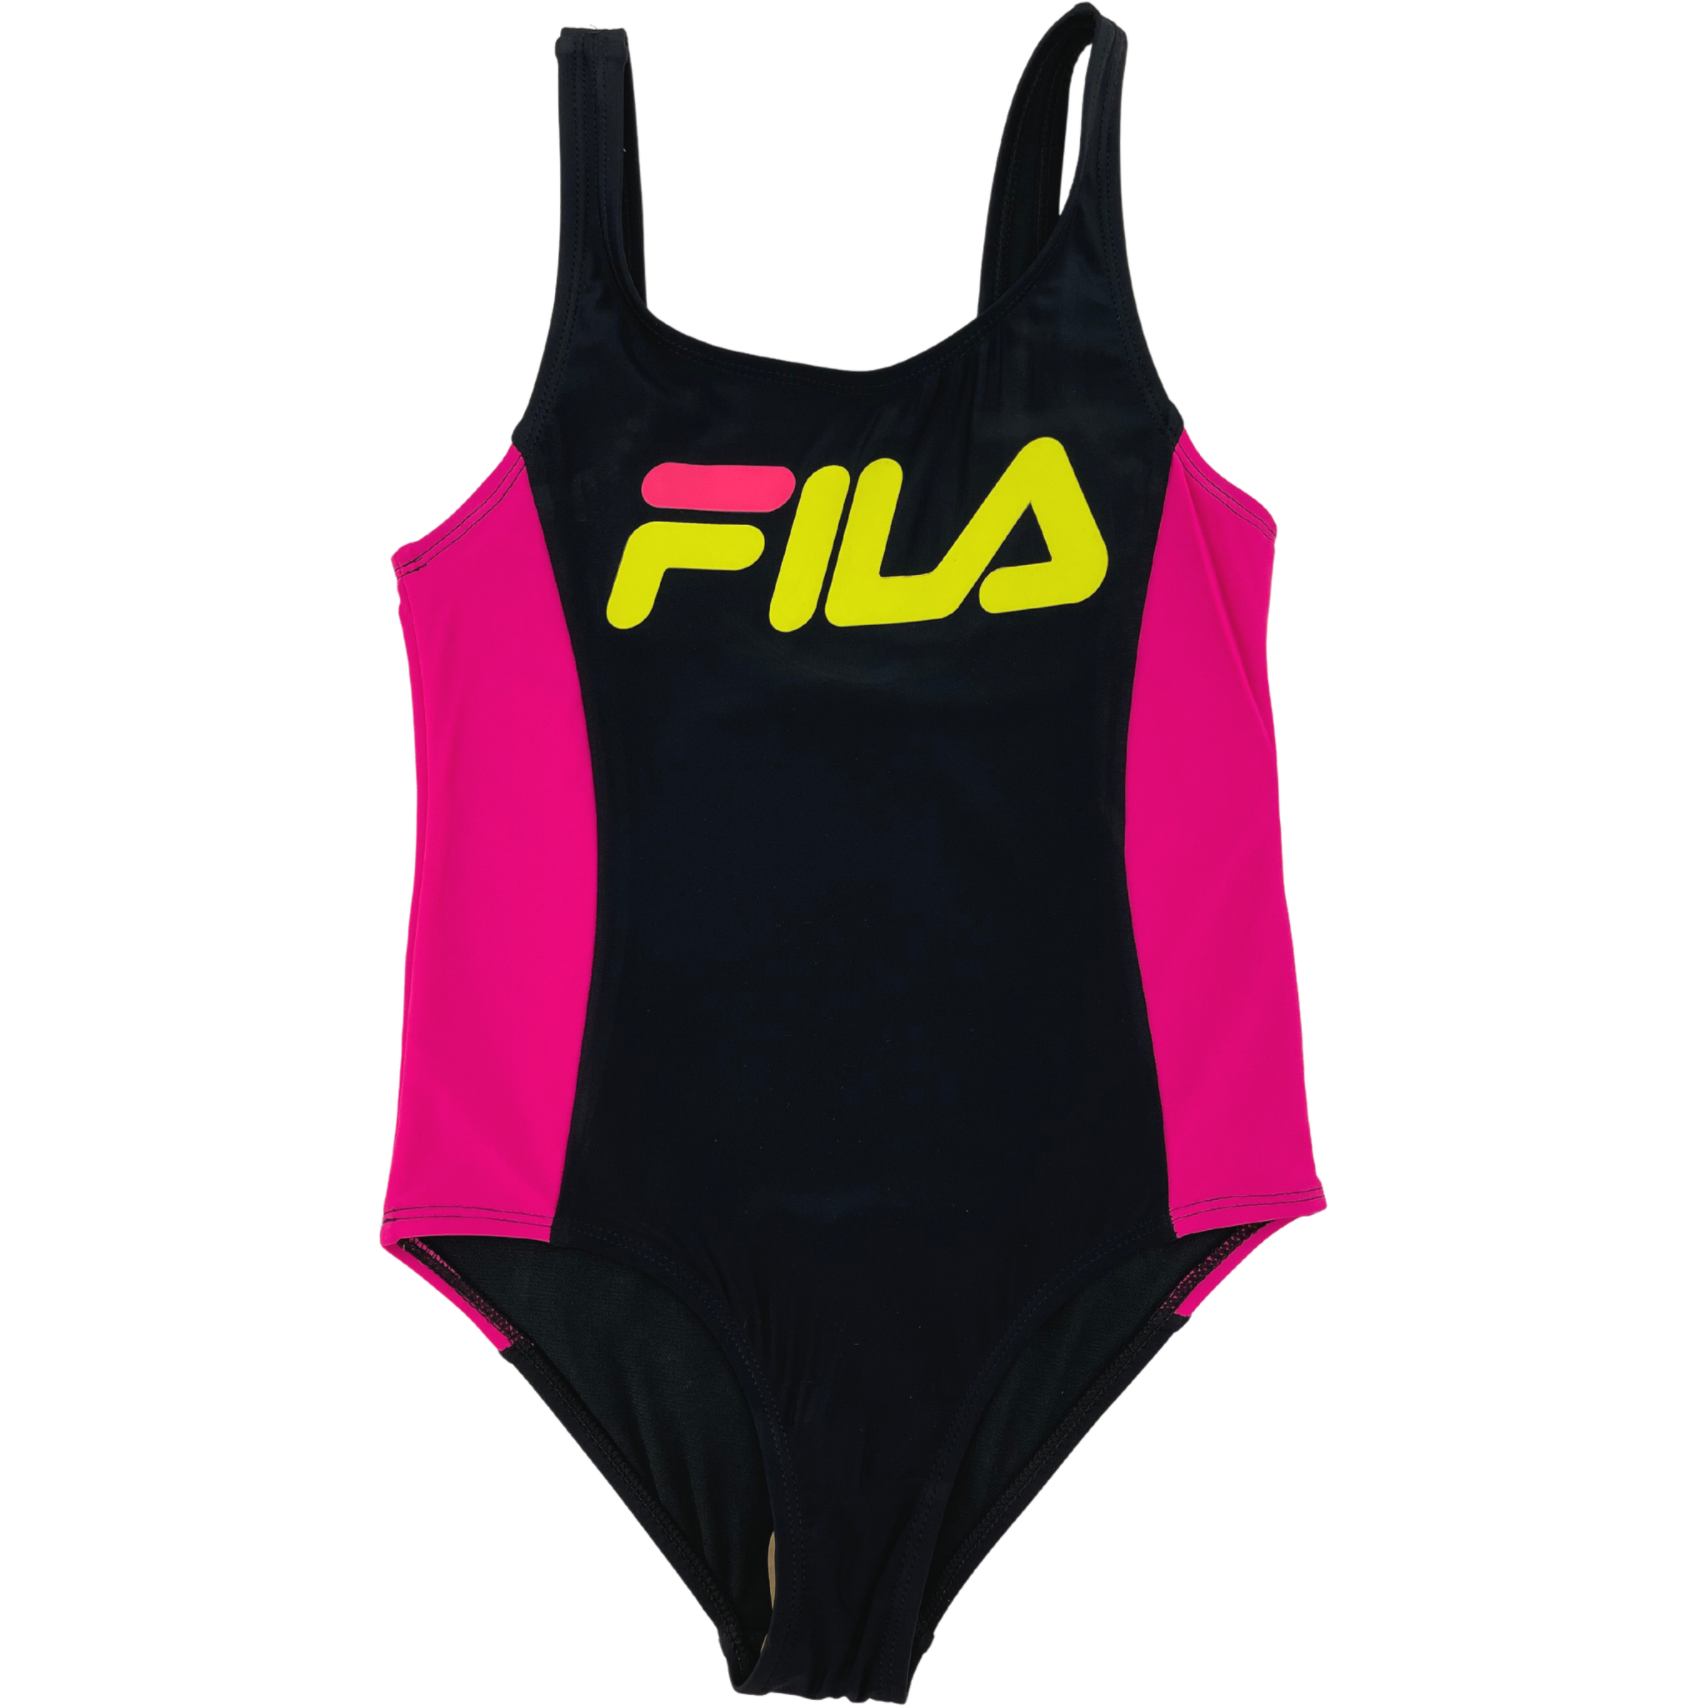 Fila Girl's One Piece Bathing Suit / Black, Pink & Yellow / Various Si ...